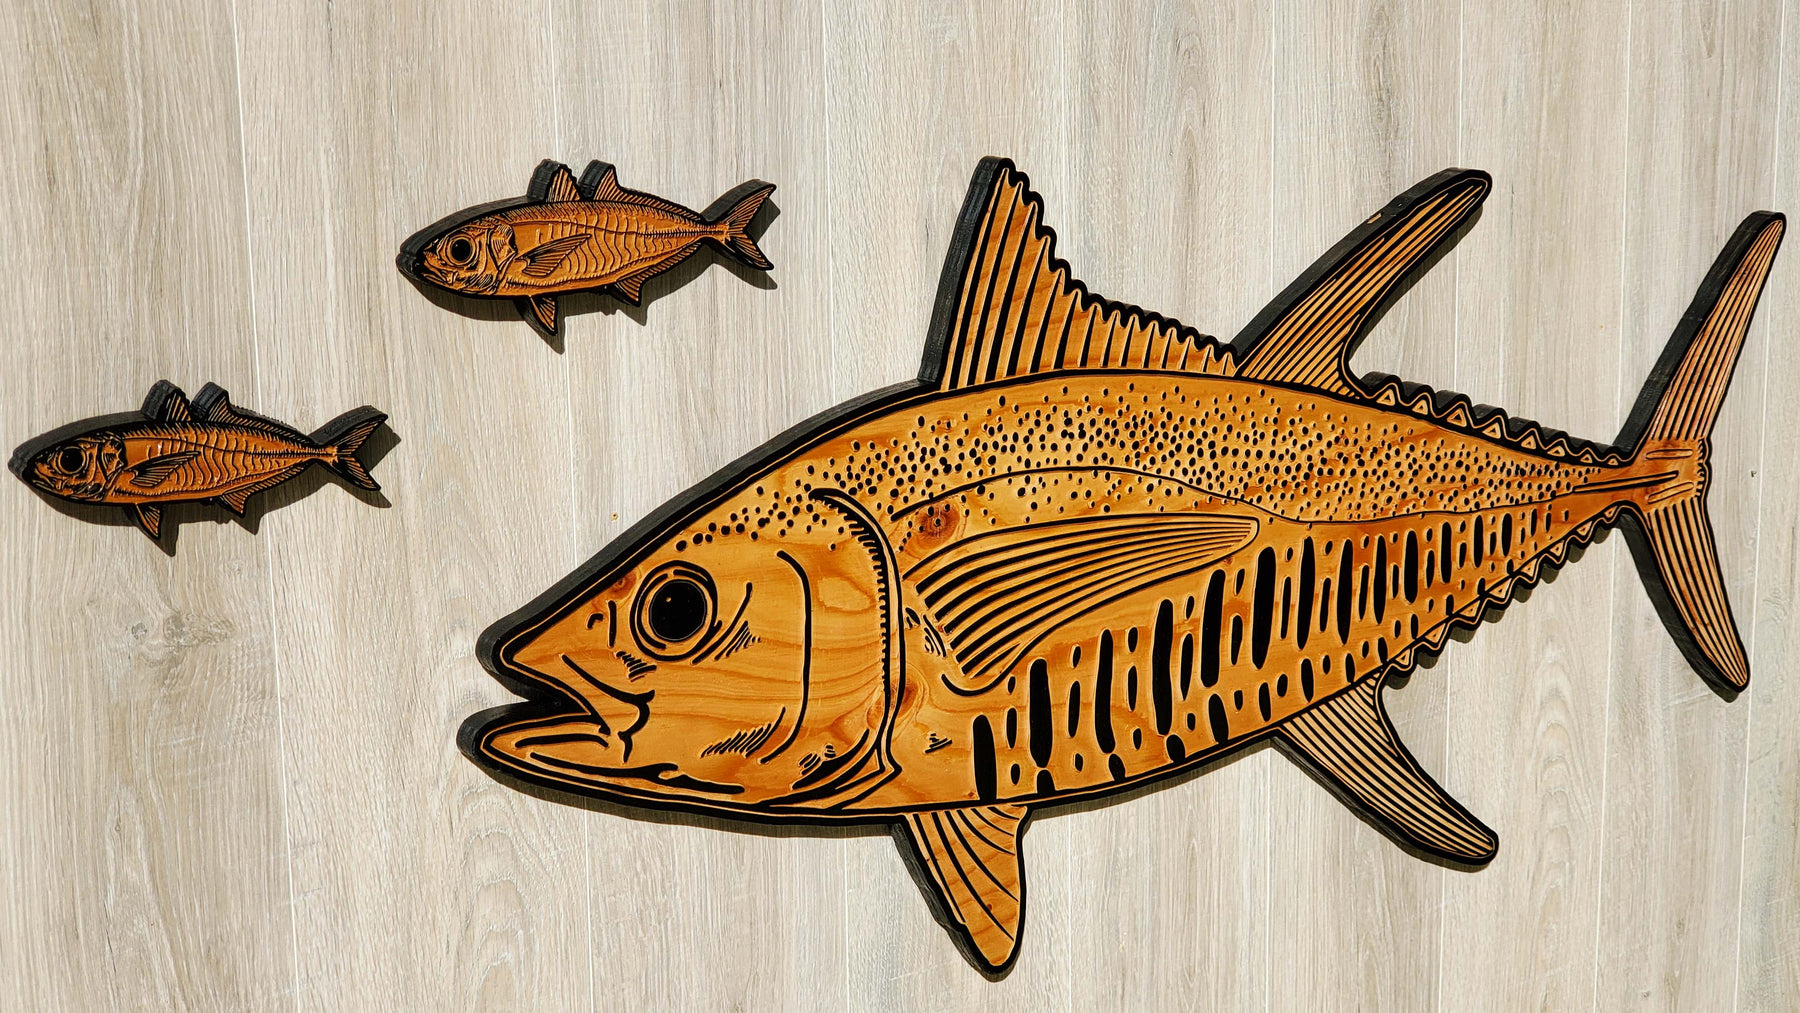 Pin by wilson on crafts  Fish wood carving, Wood carving art, Wooden fish